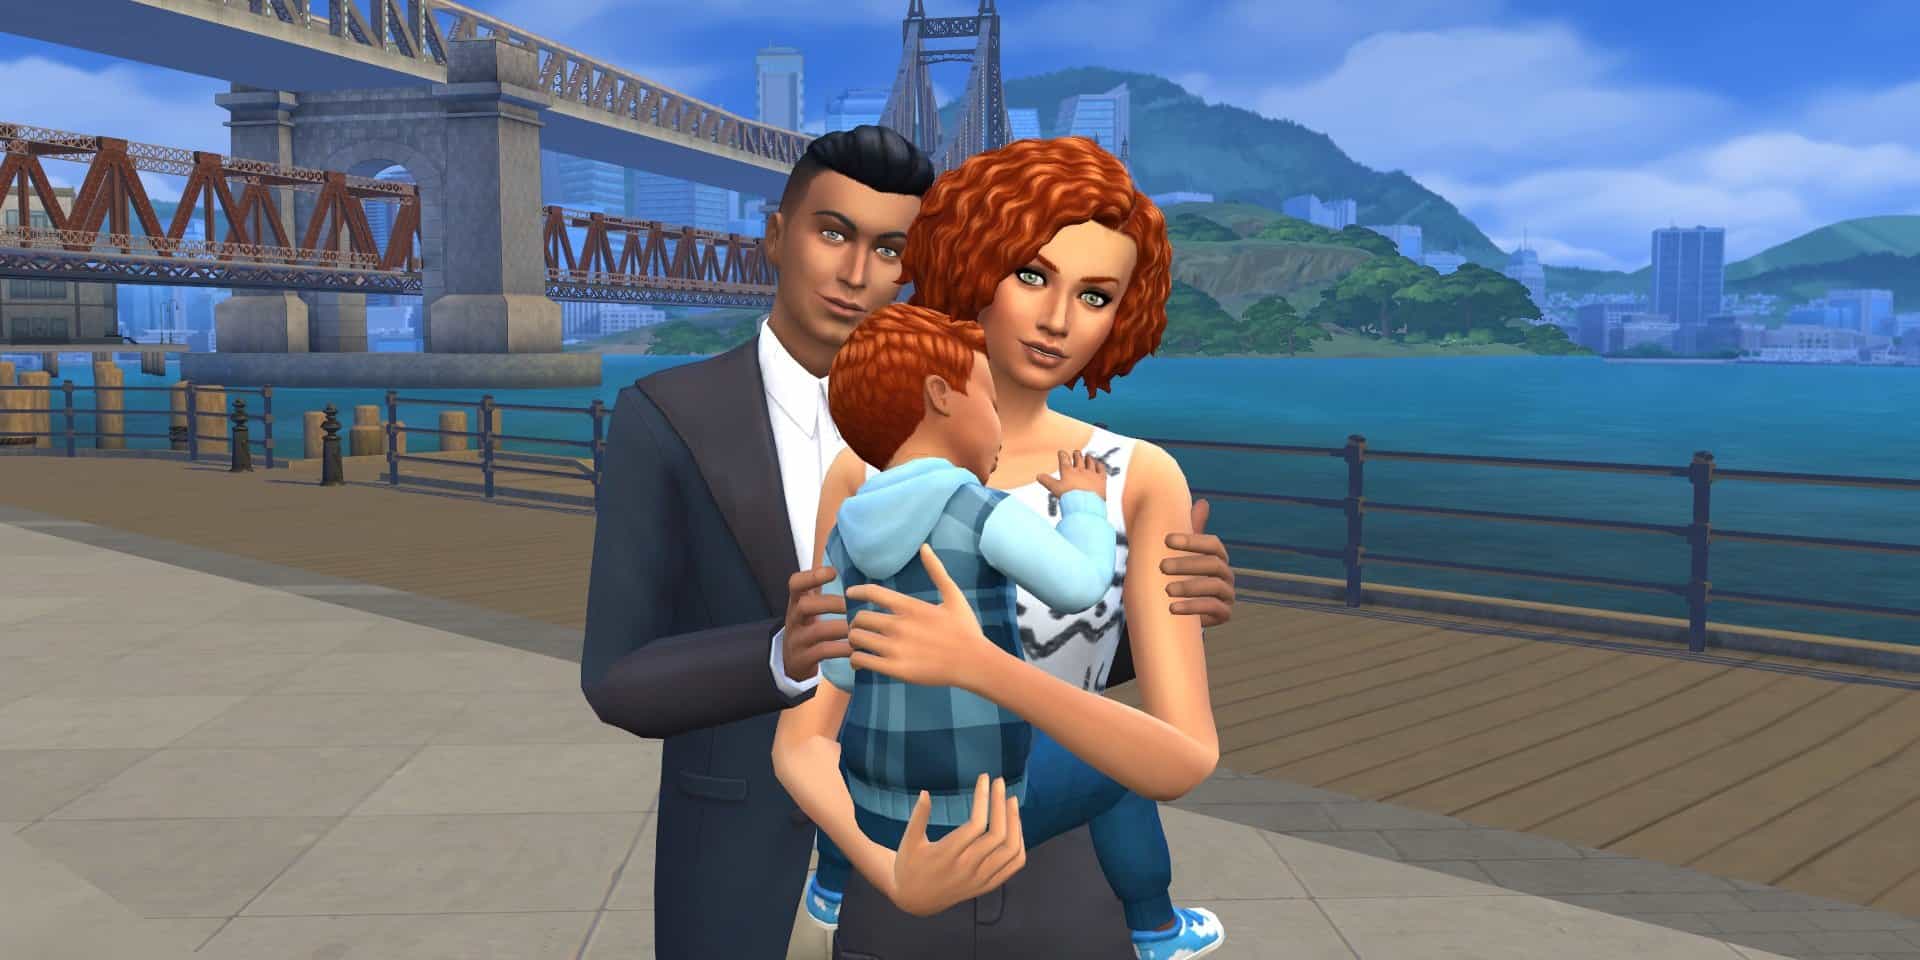 A Couple with a Child holds a pose.